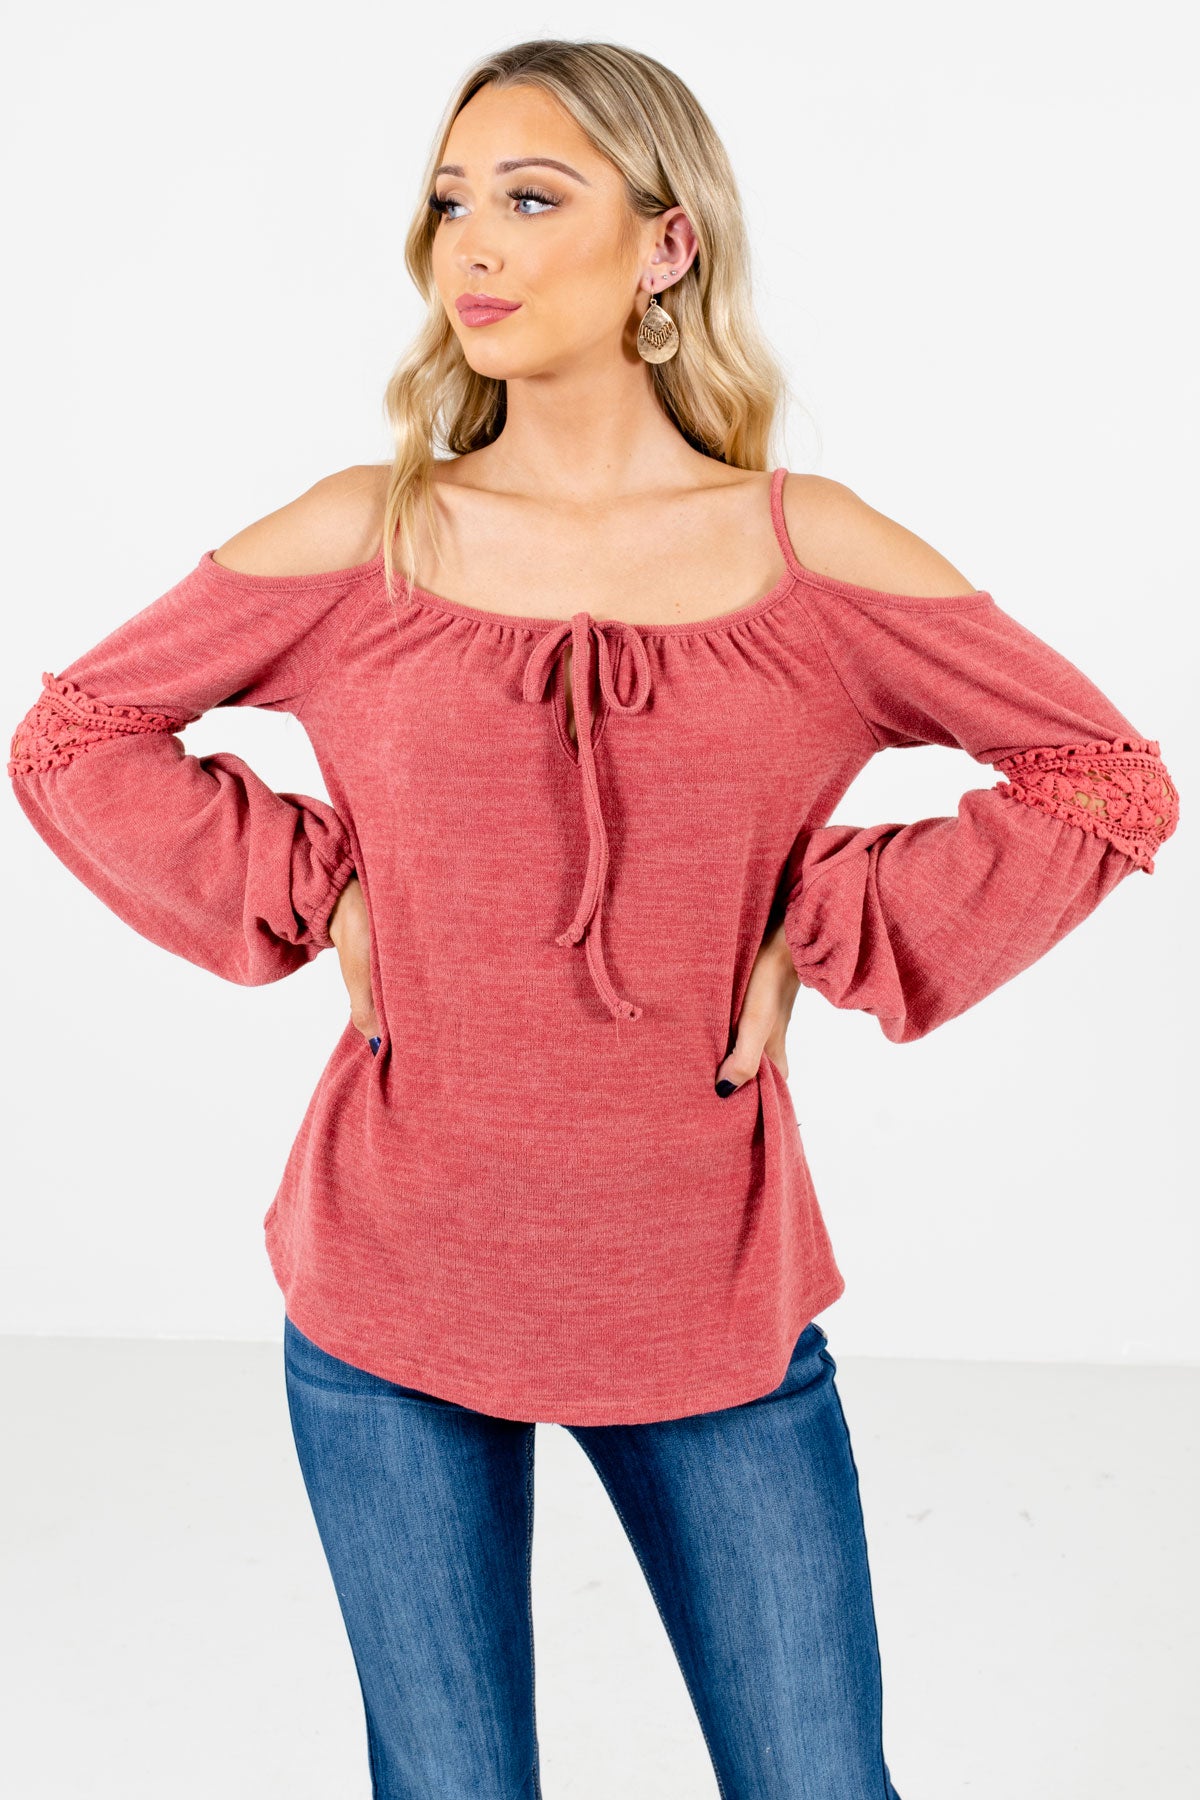 Pink Cold Shoulder Style Boutique Tops for Women